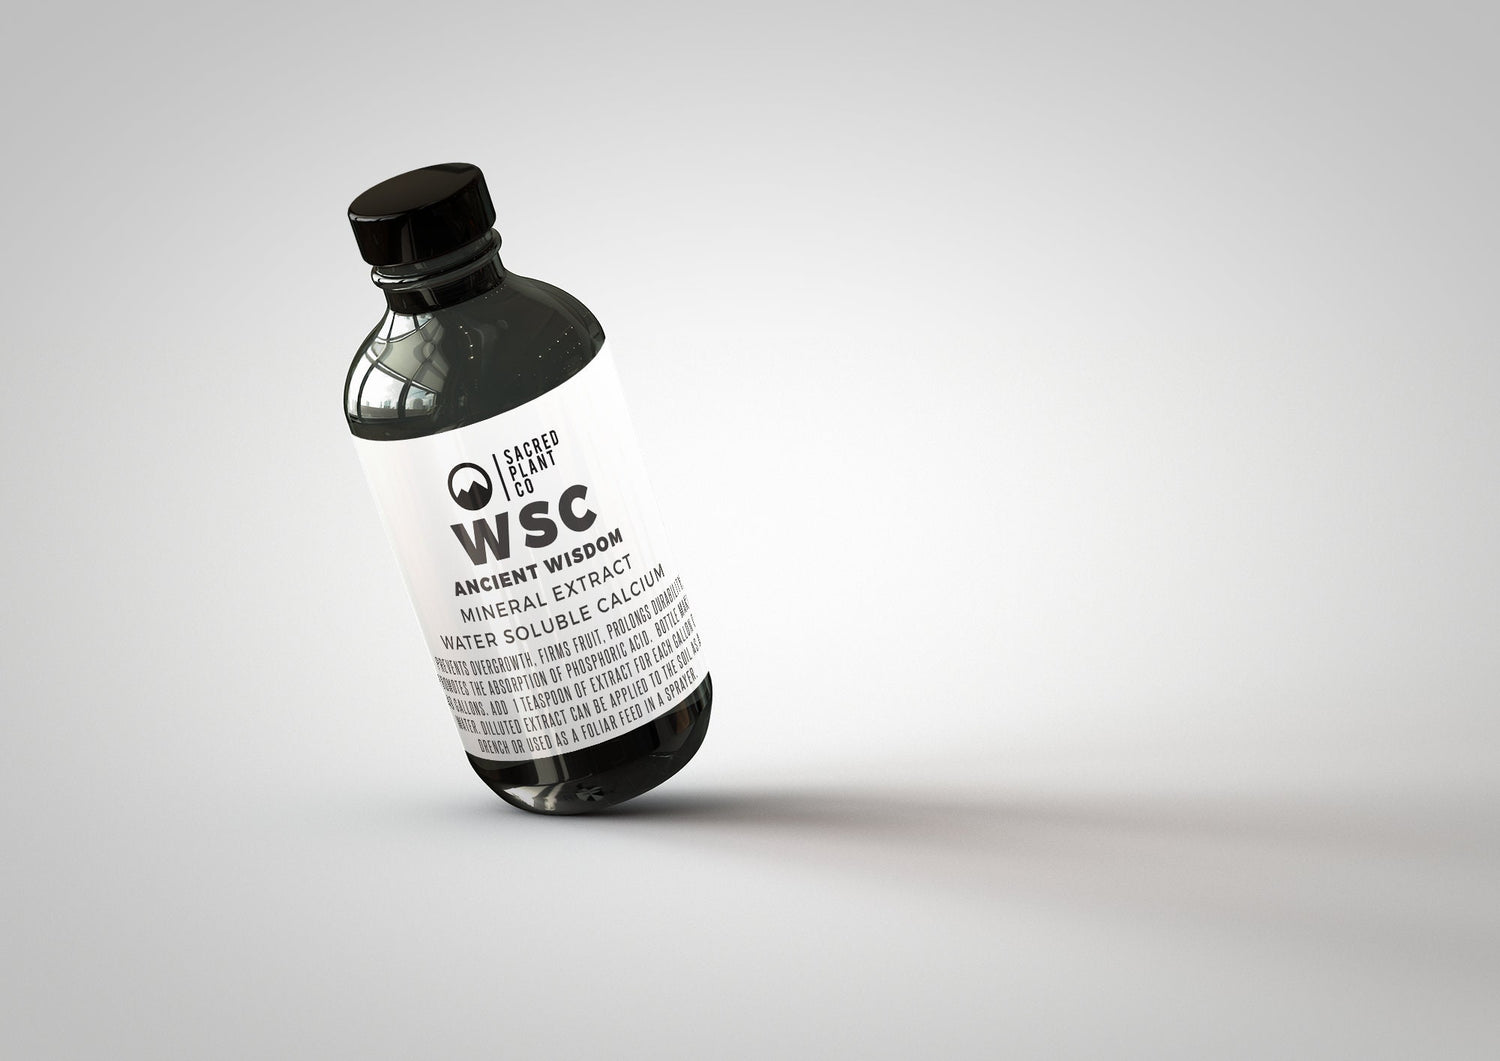 Close-up of our MINERAL EXTRACT - WSC bottle tilting, showcasing the quality of Low Water Colorado Mountain Herb Farm&